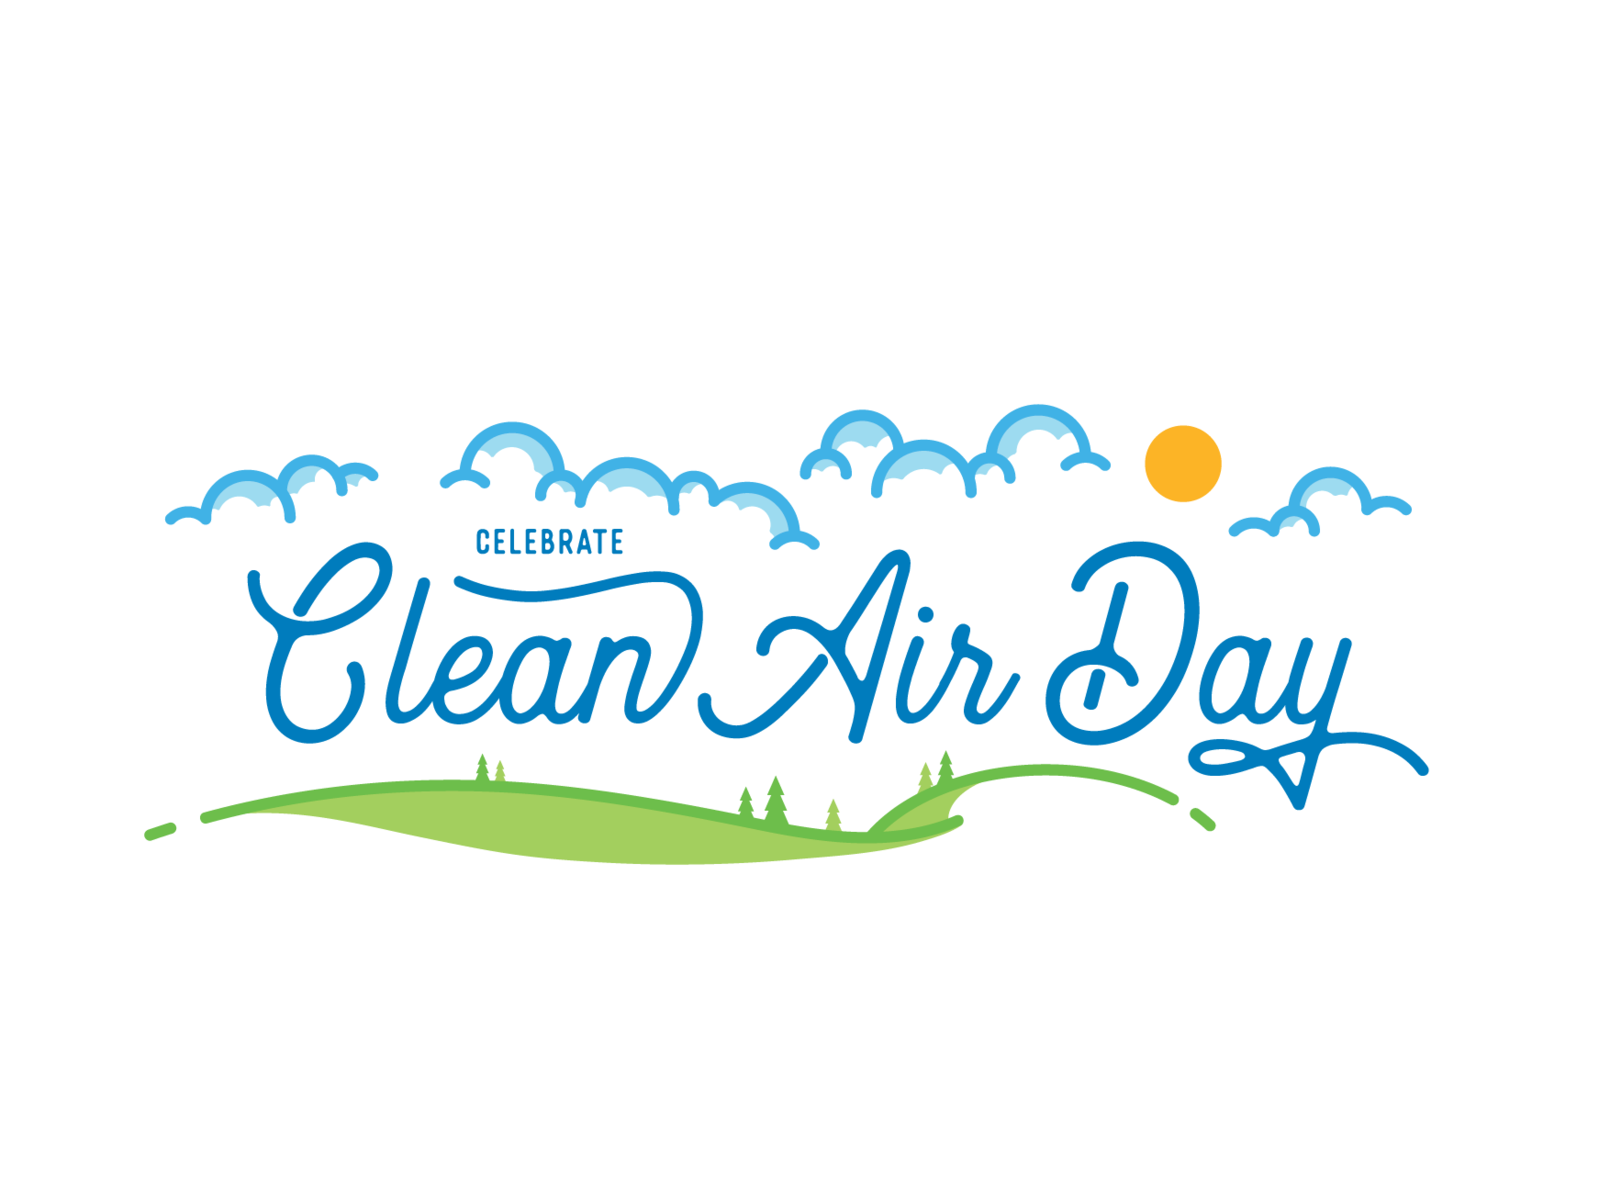 Celebrate Clean Air Day Illustration by Robyn Kacperski on Dribbble